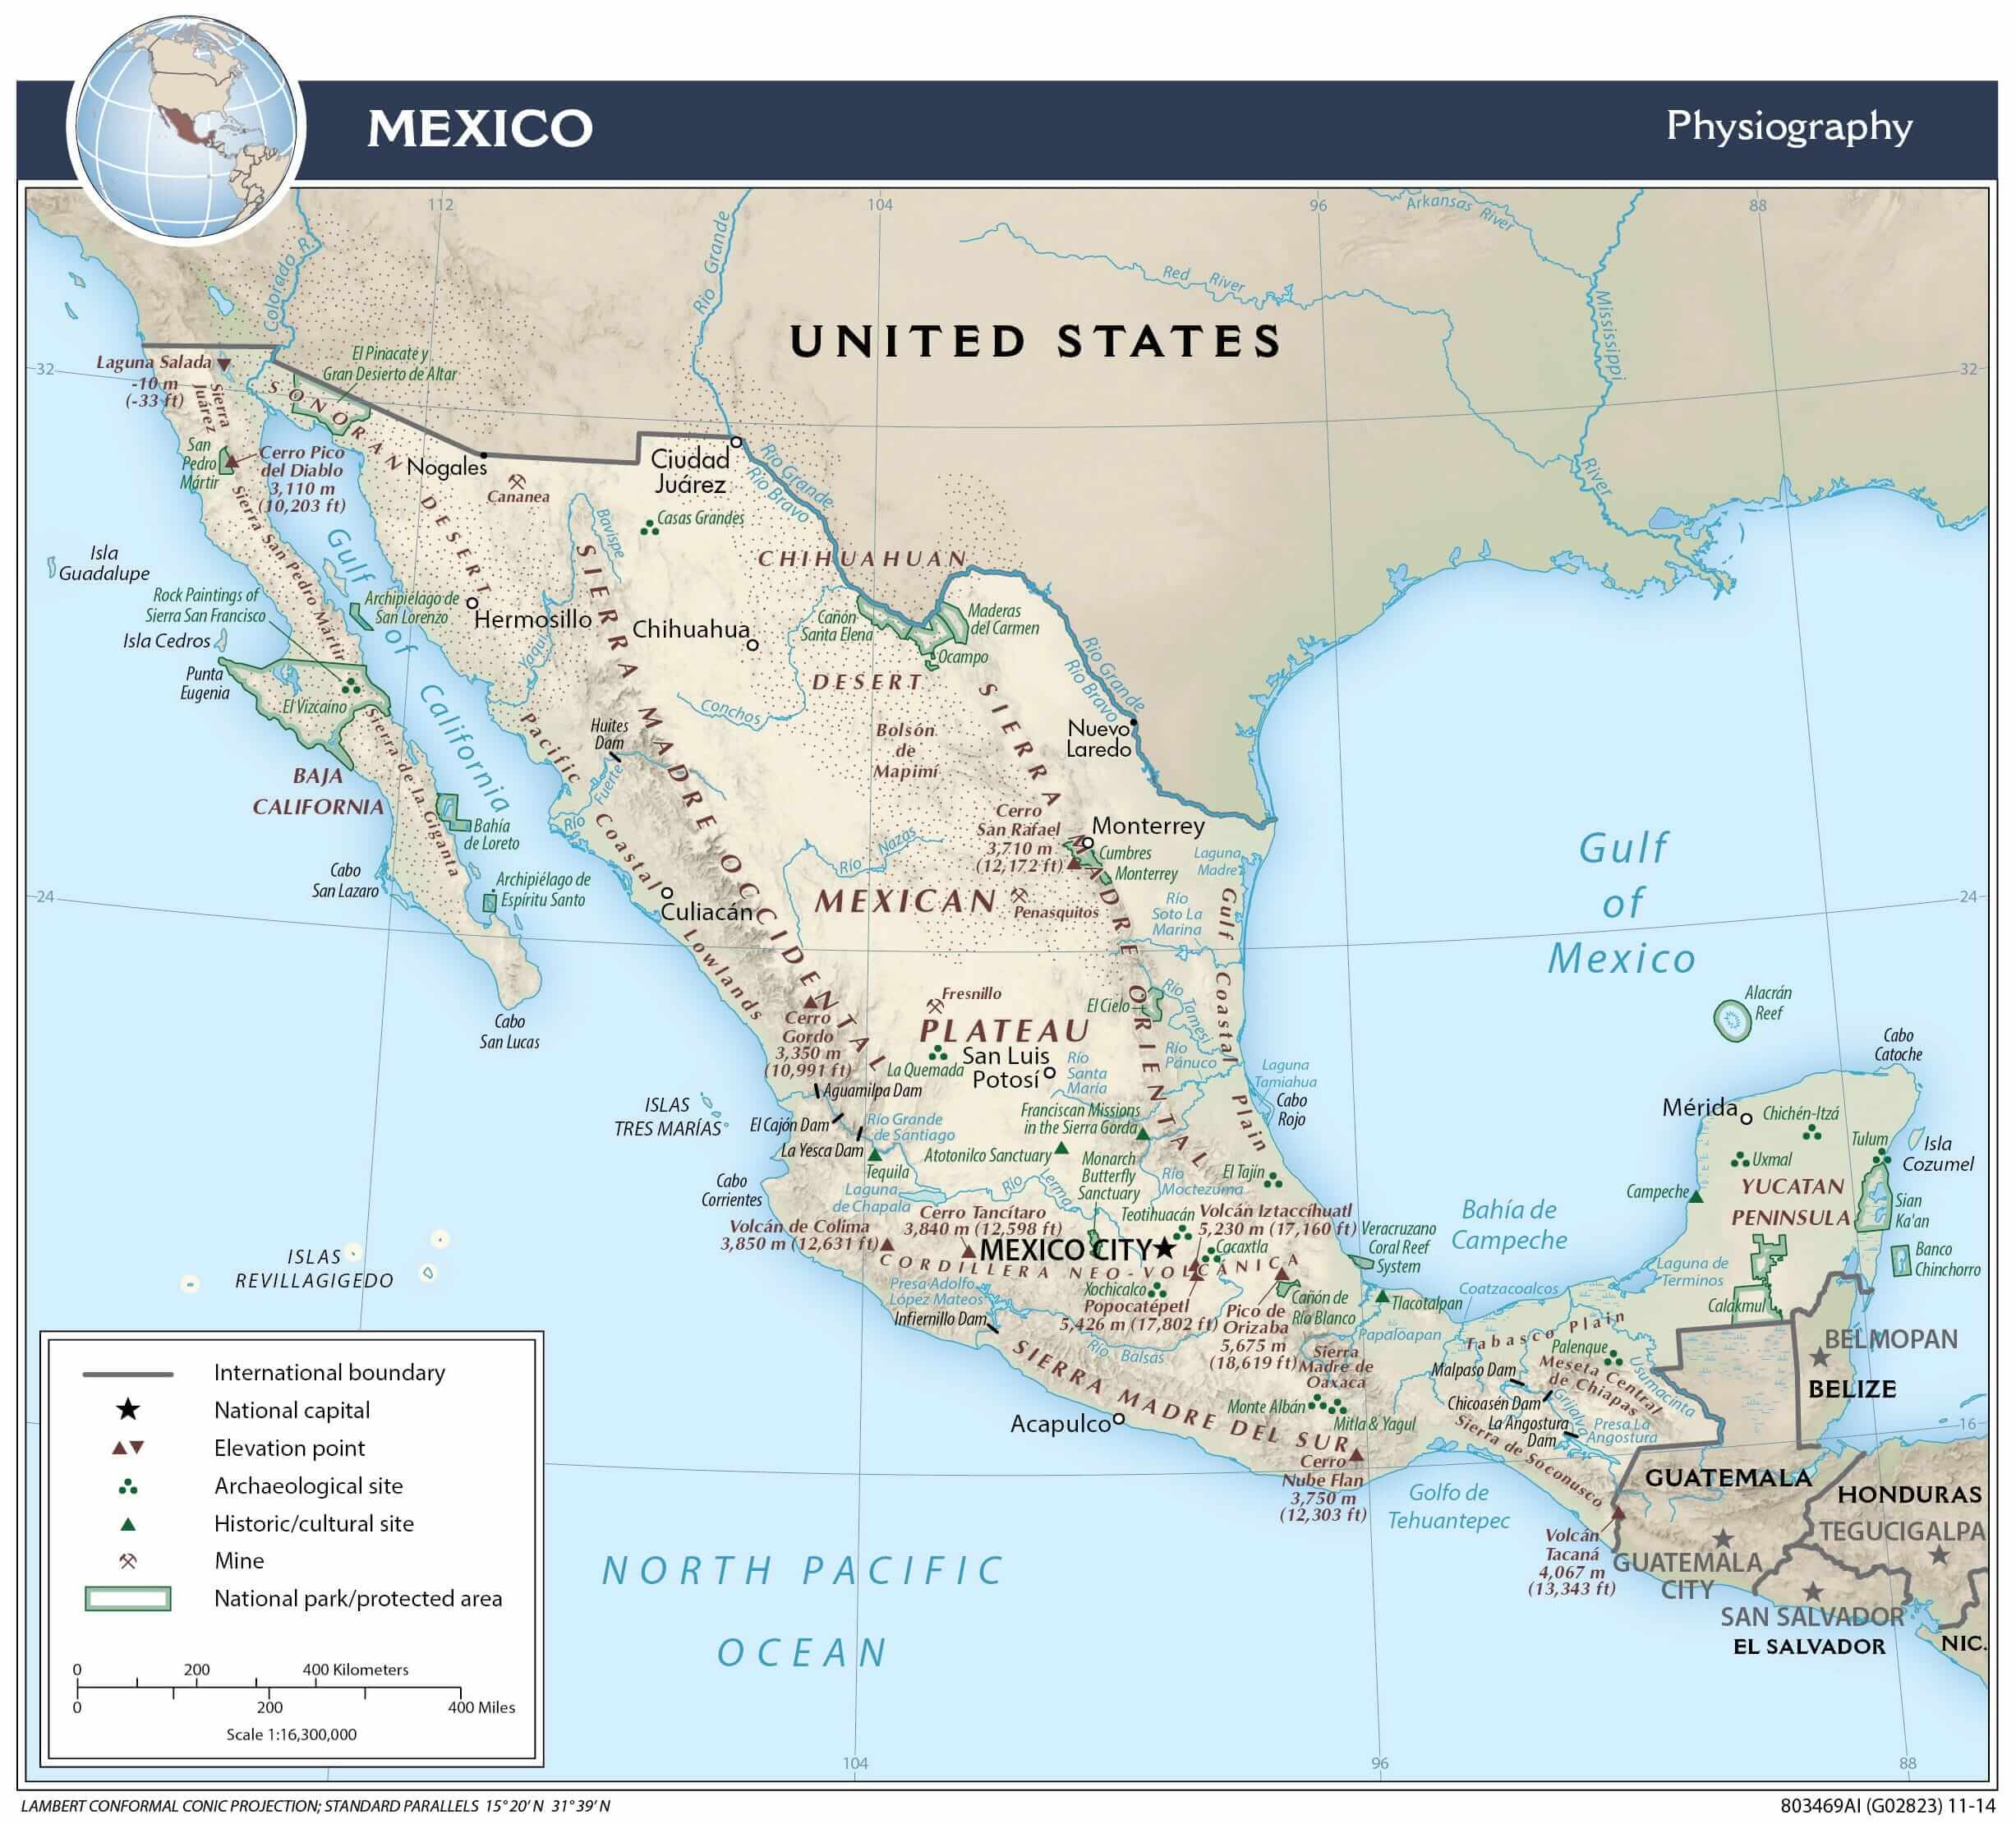 Mexico physiographic map